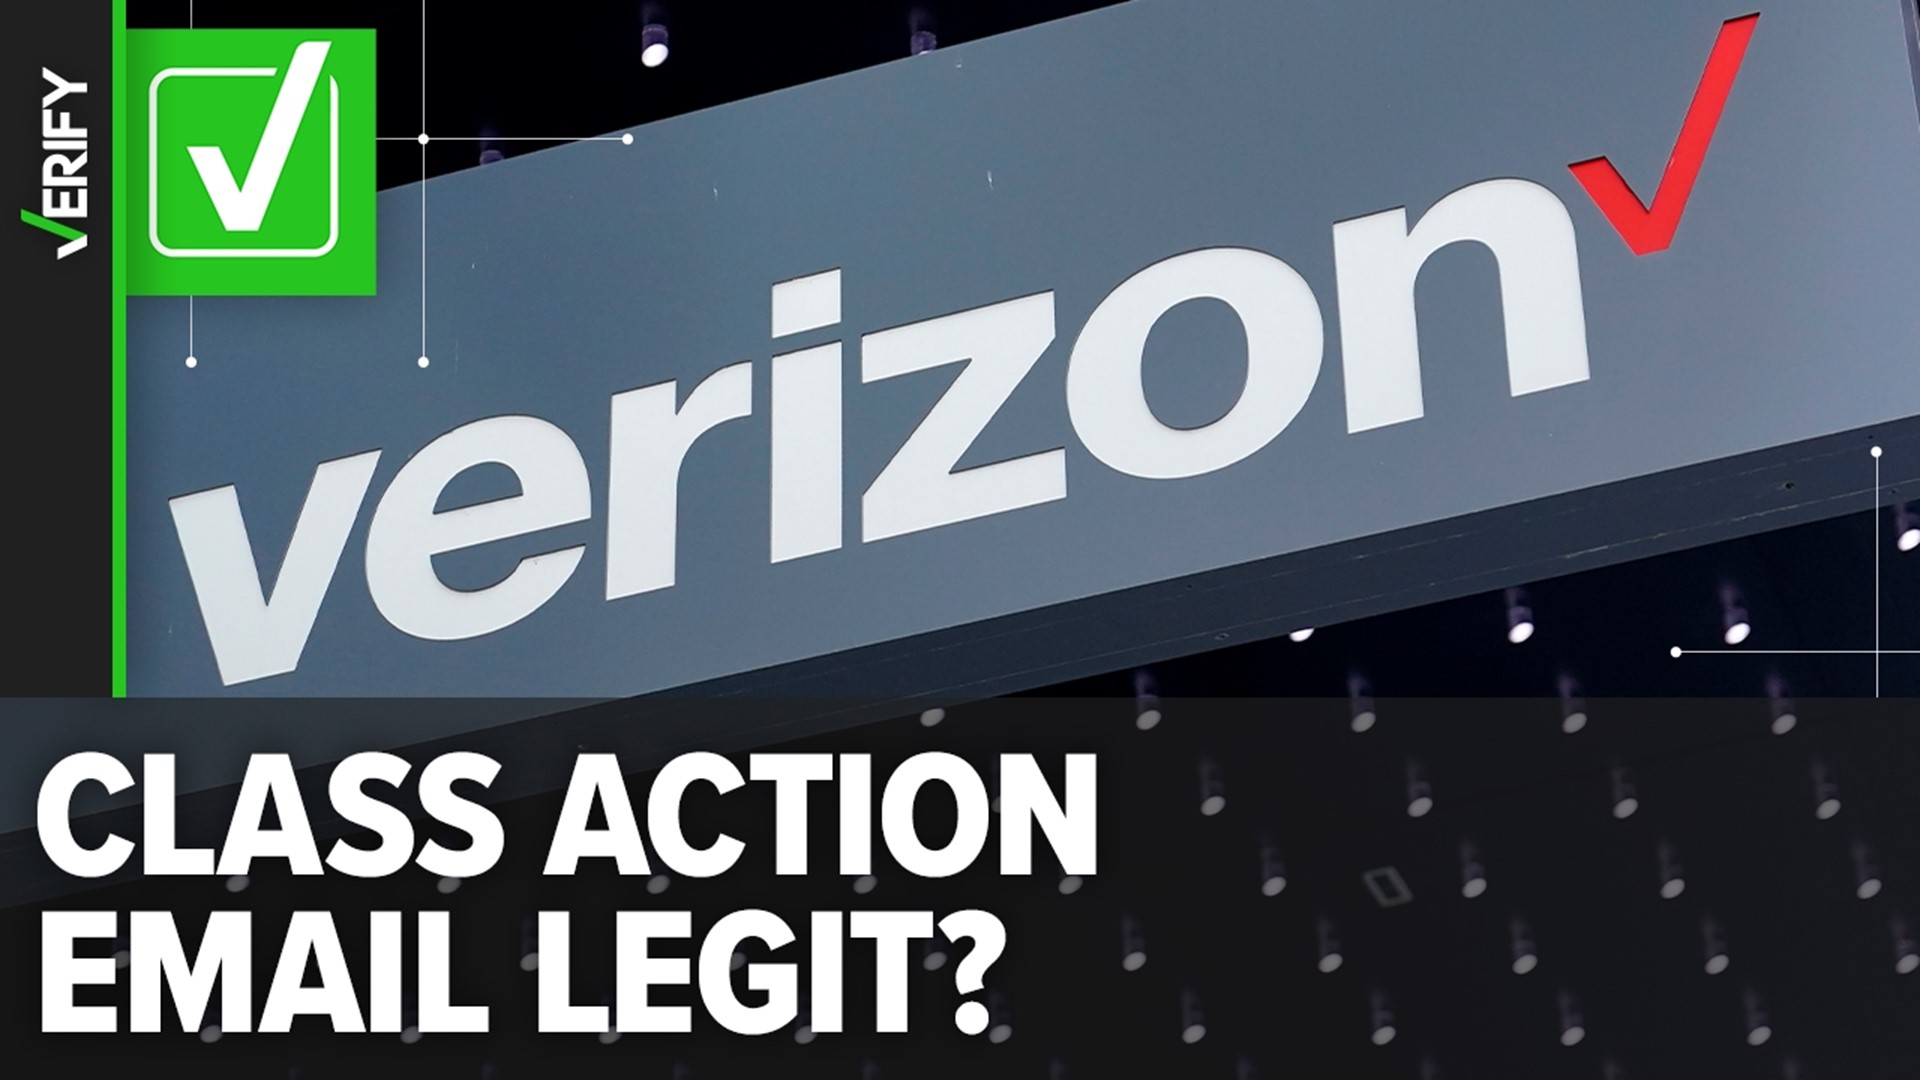 Verizon class action lawsuit settlement emails are real